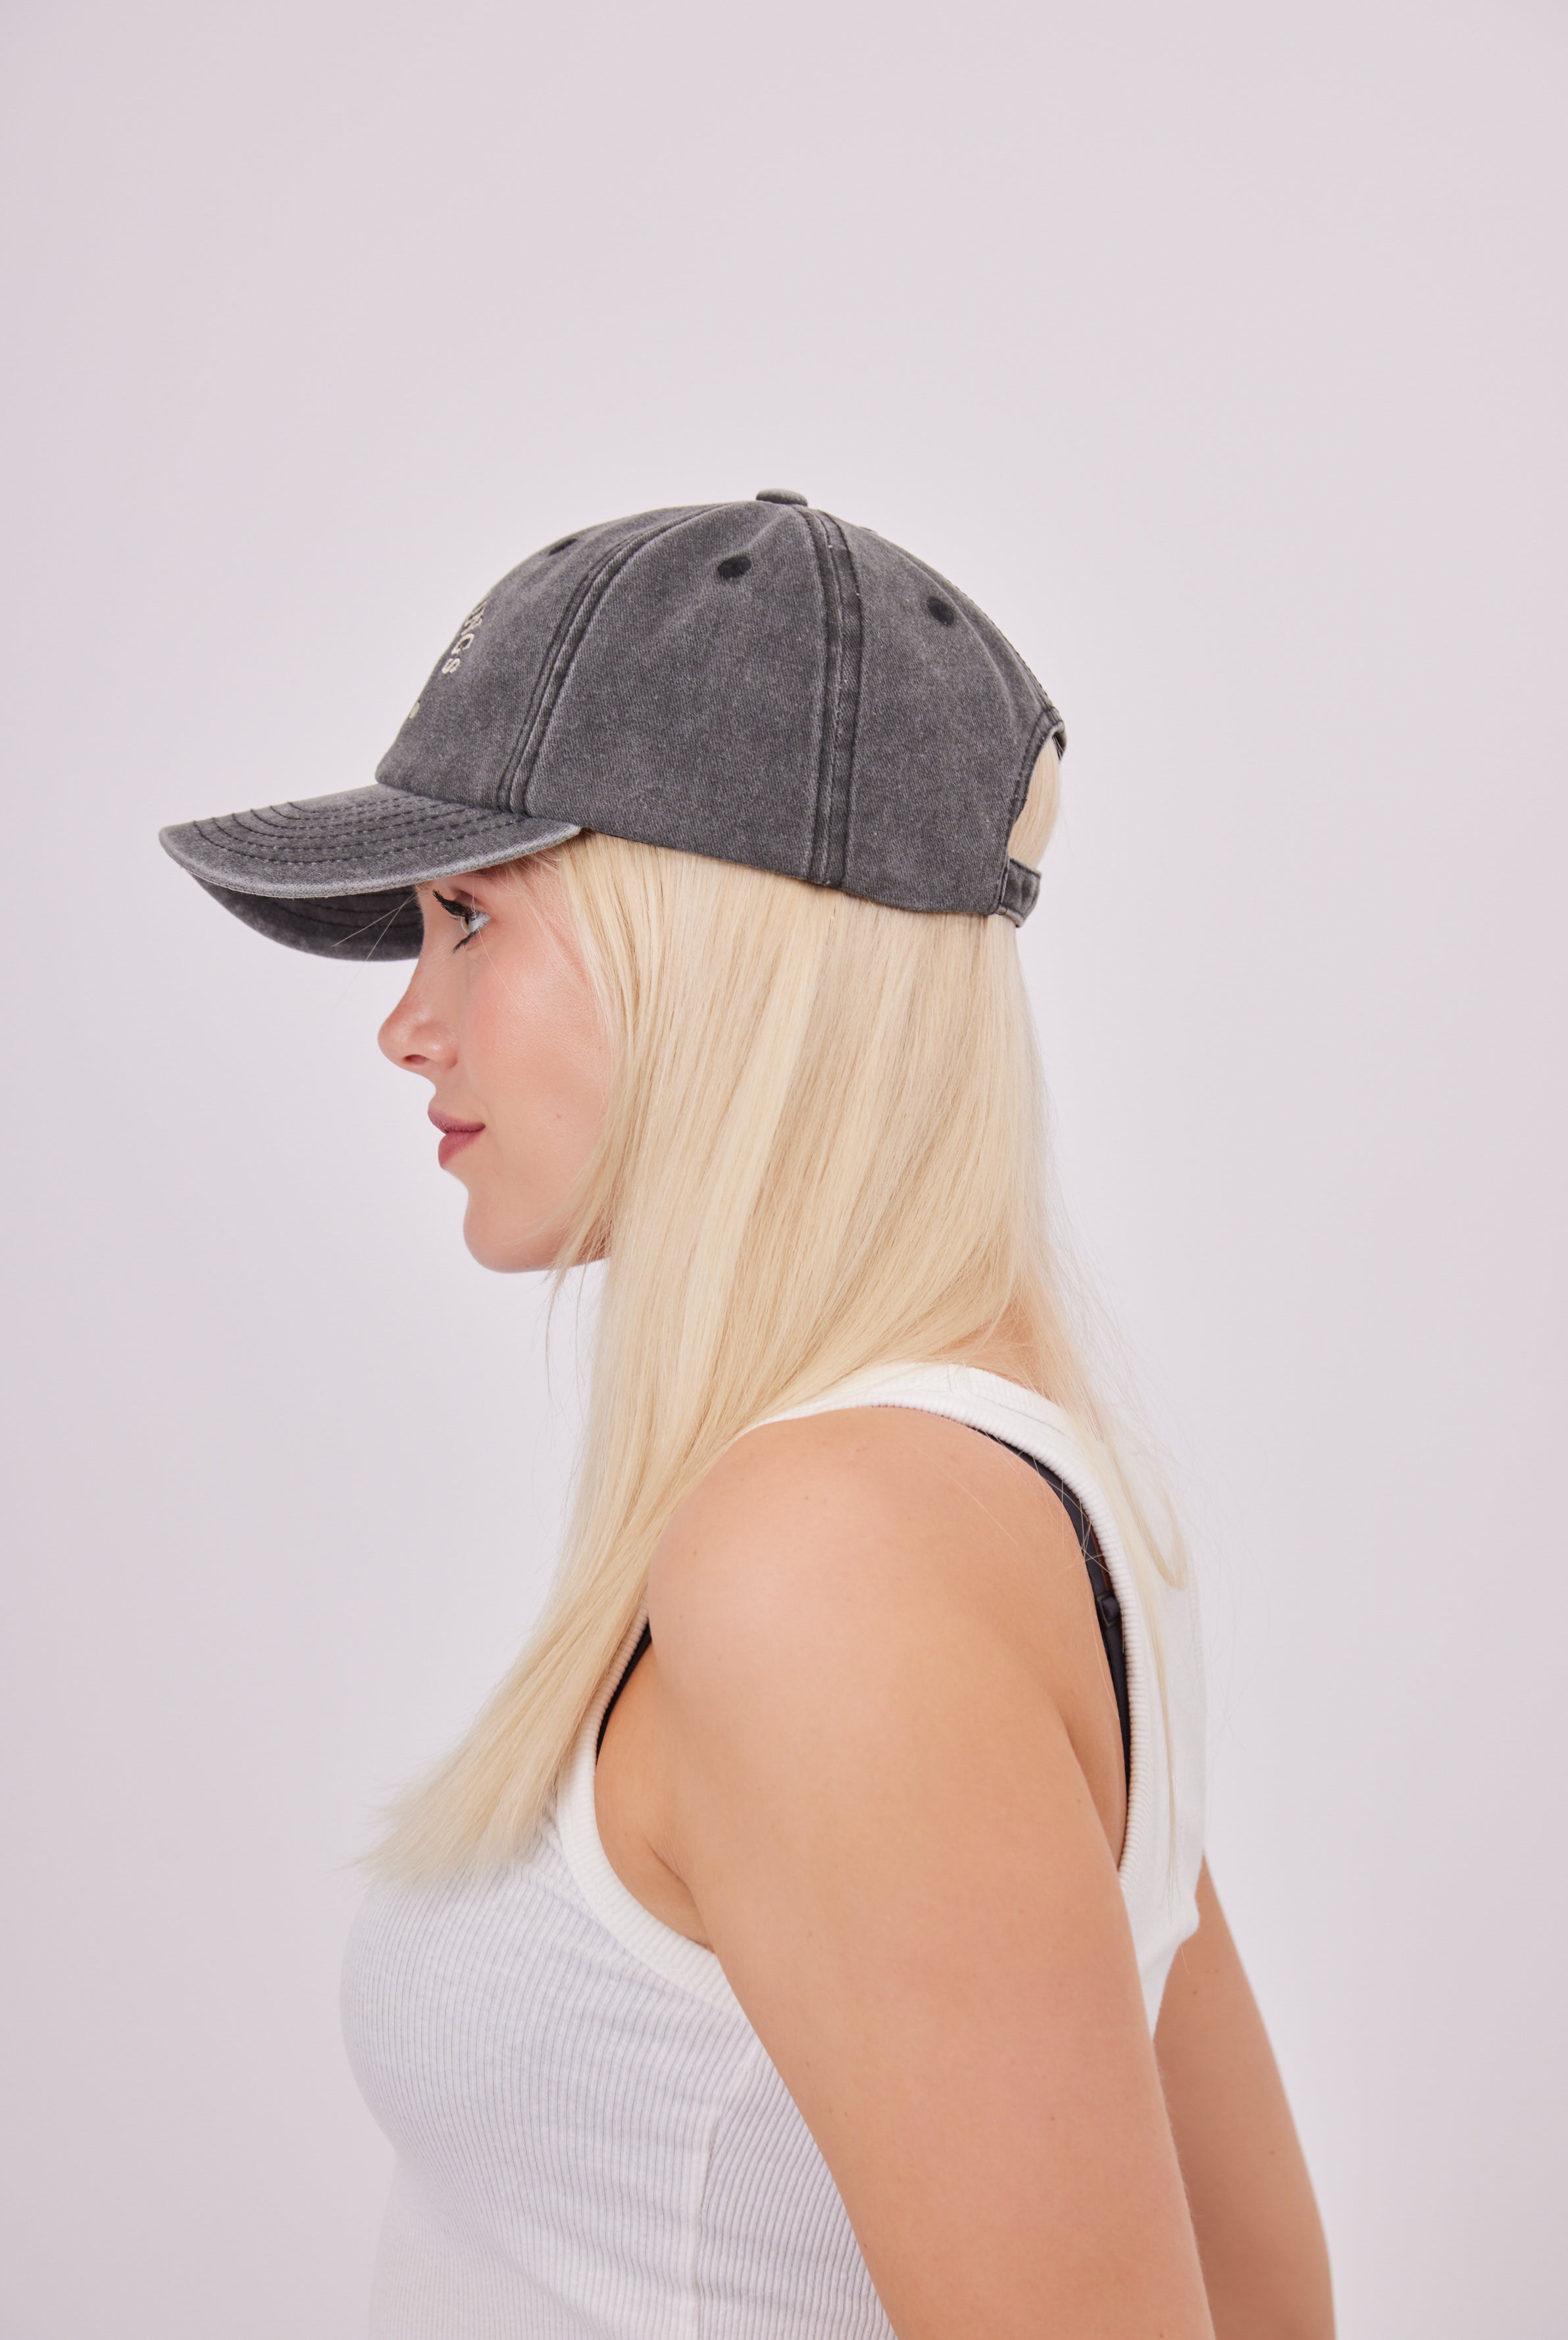 My Accessories London Palm Springs Baseball Cap in Washed Black | athleisure | activewear | gym hat | gym cap | sporty accessories | sporty cap | sporty hat | summer accessories | summer hat | summer hats | summer cap | spring accessories | spring hat | embroidered hat | embroidered cap | baseball cap | distressed cap | retro cap | women's cap